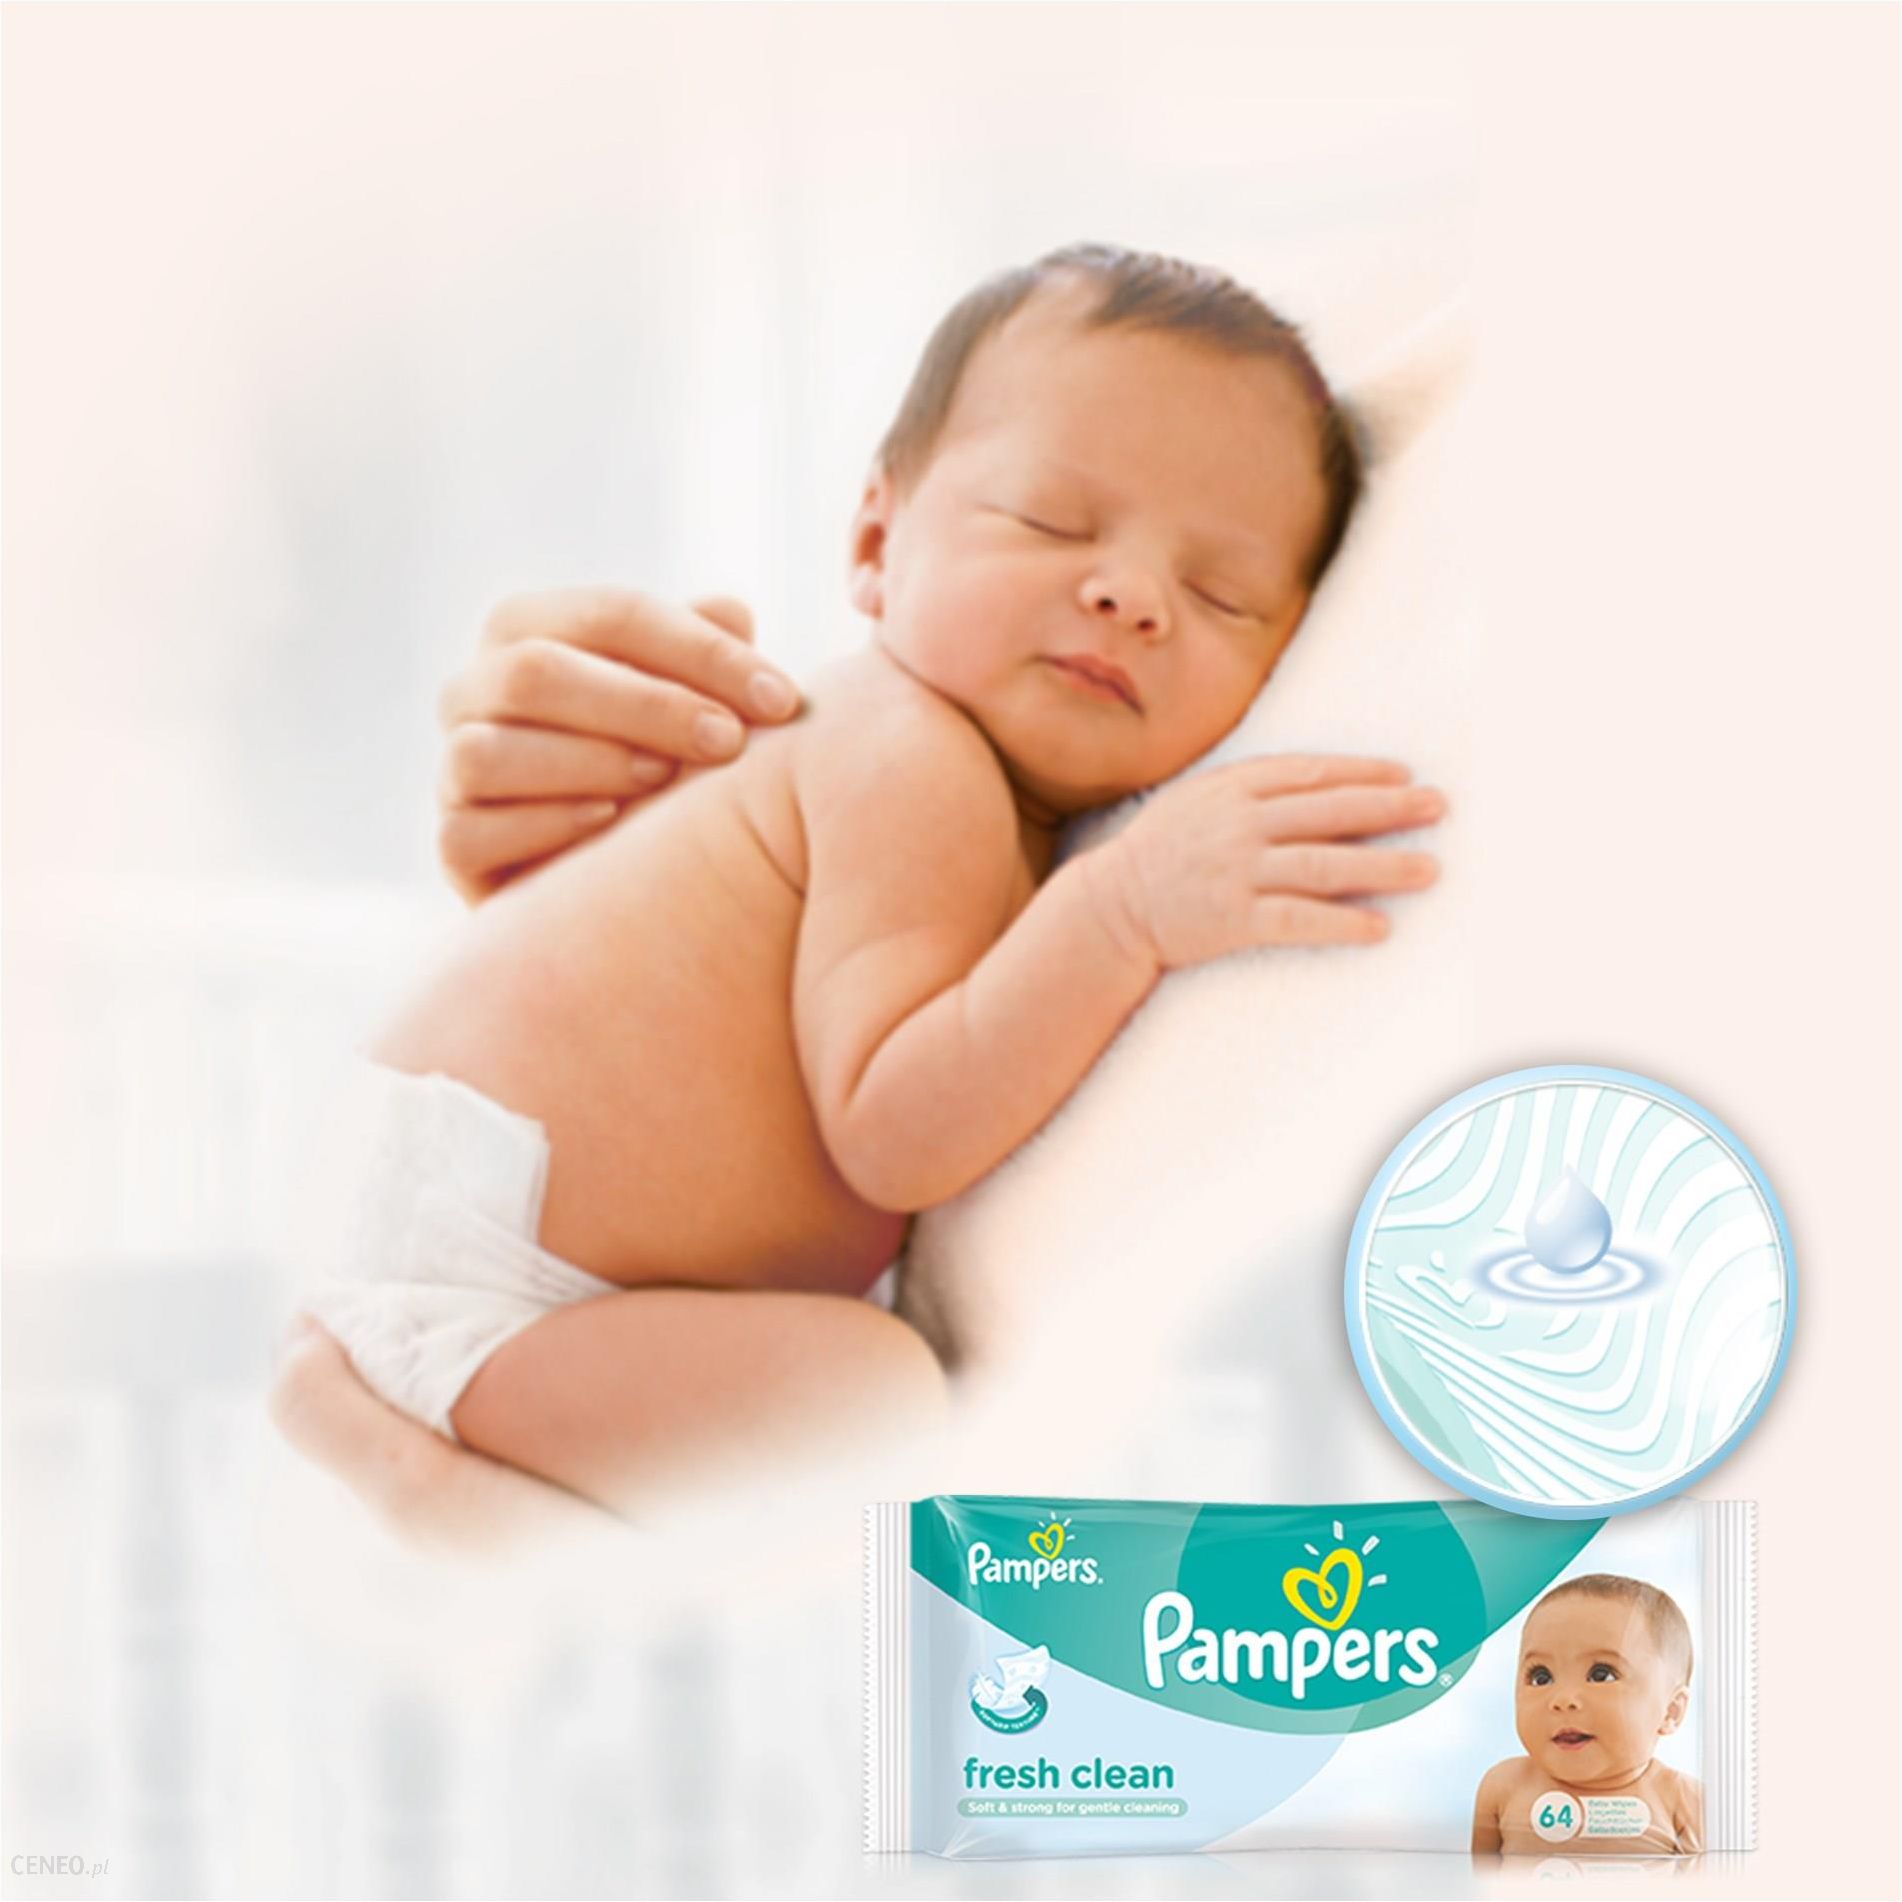 33 tc pampers